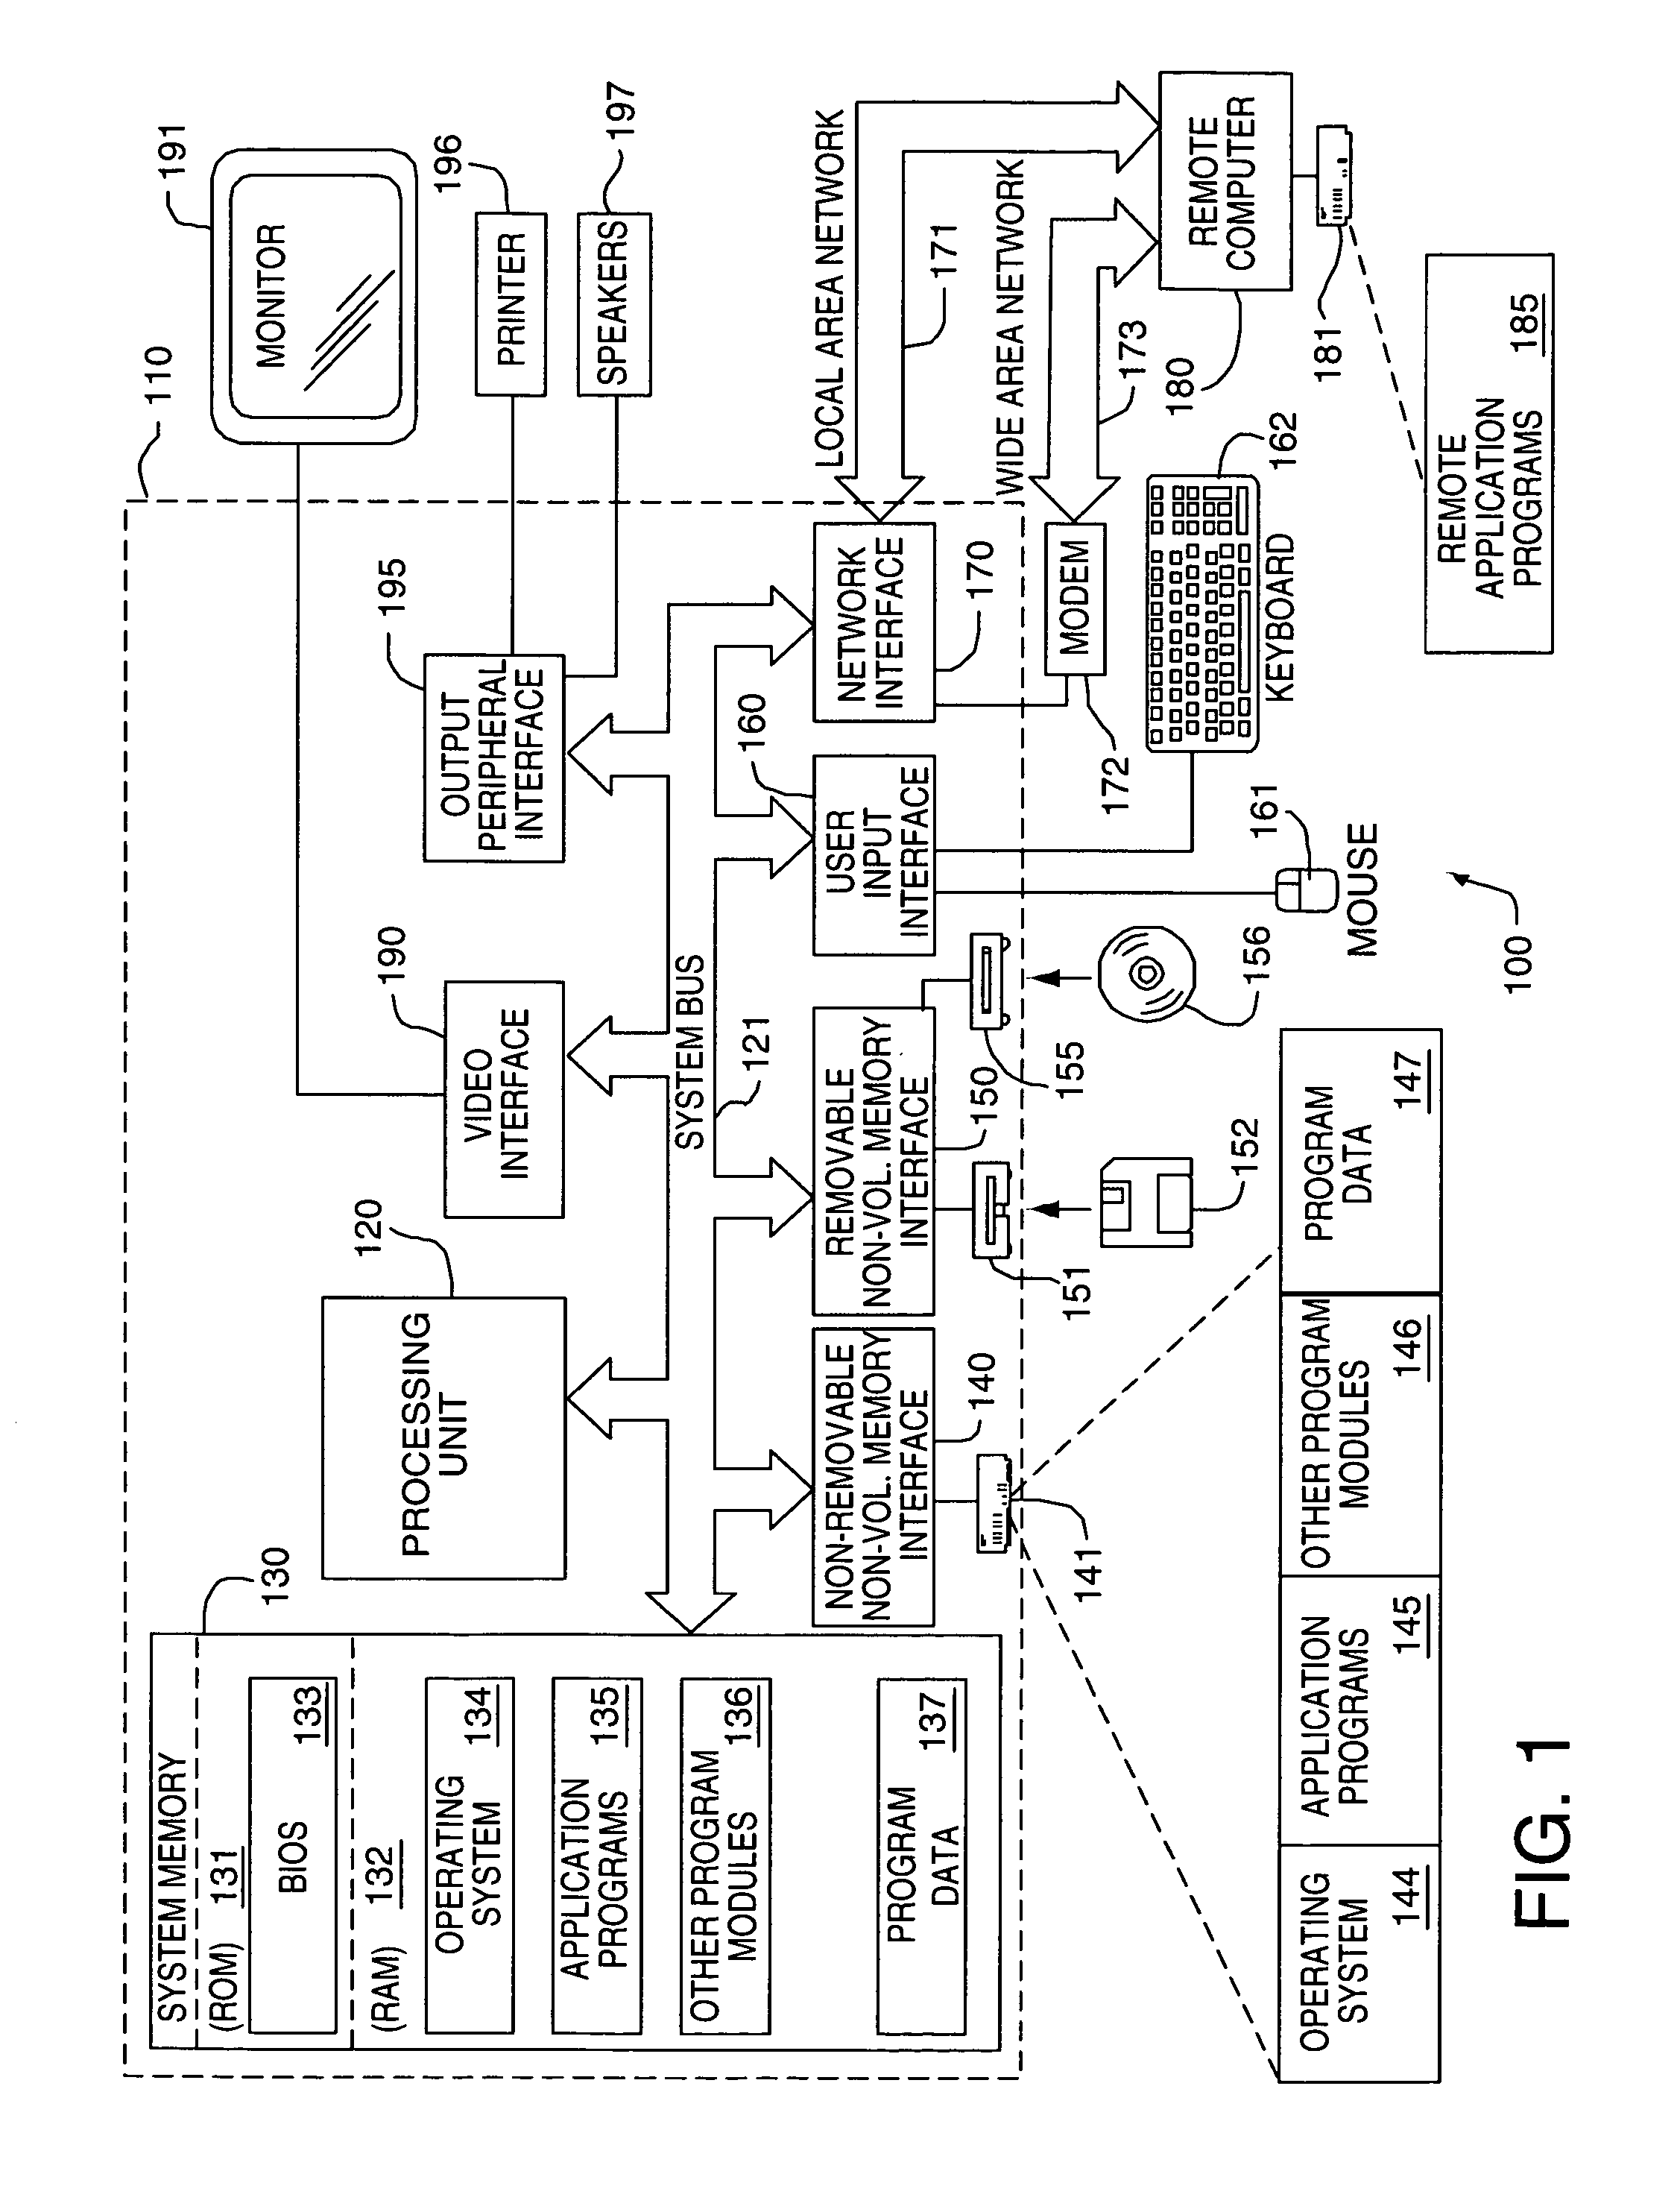 System and method for controlling manipulation of tiles within a sidebar